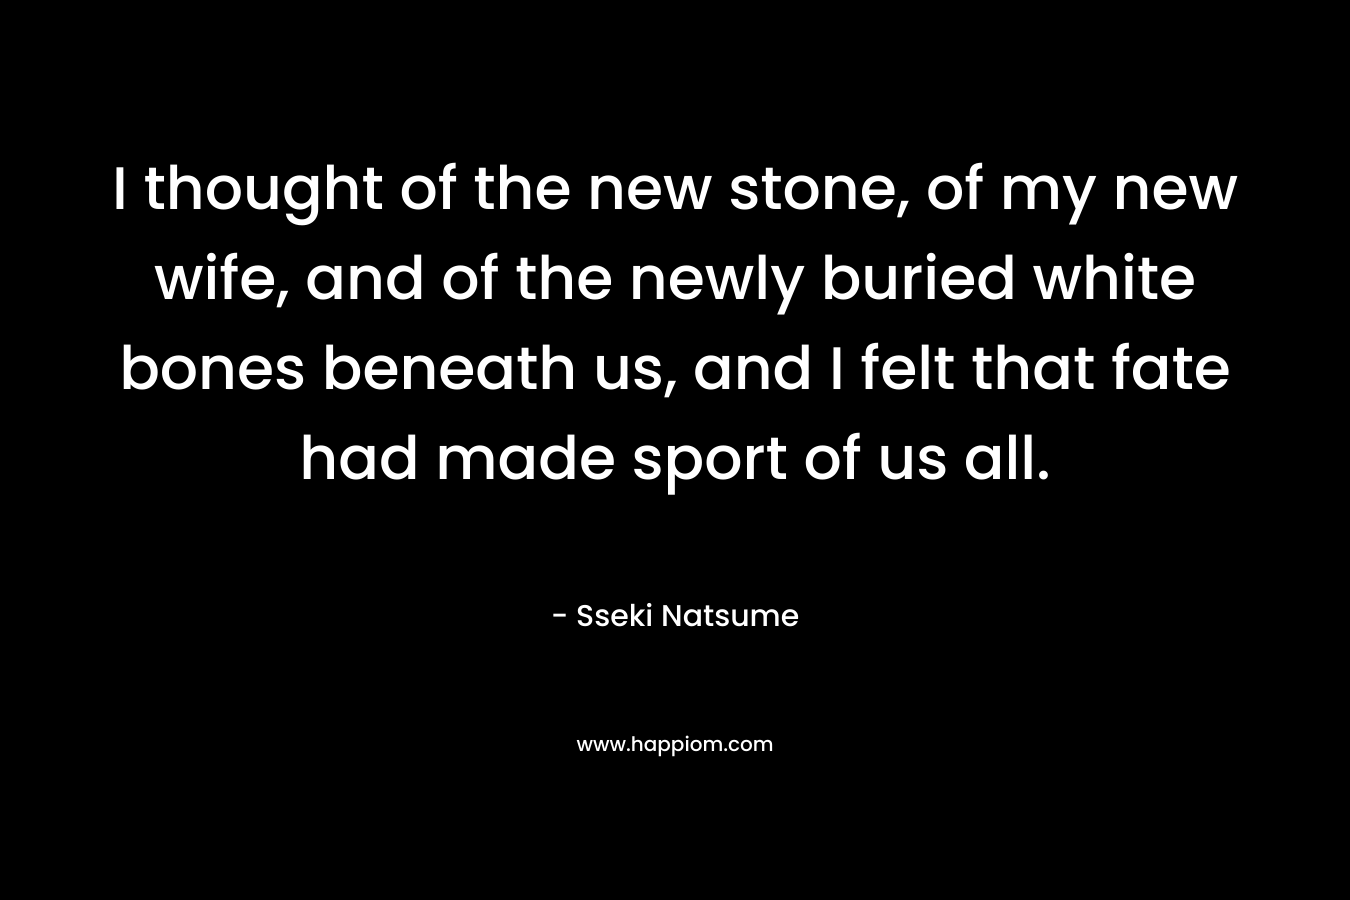 I thought of the new stone, of my new wife, and of the newly buried white bones beneath us, and I felt that fate had made sport of us all.